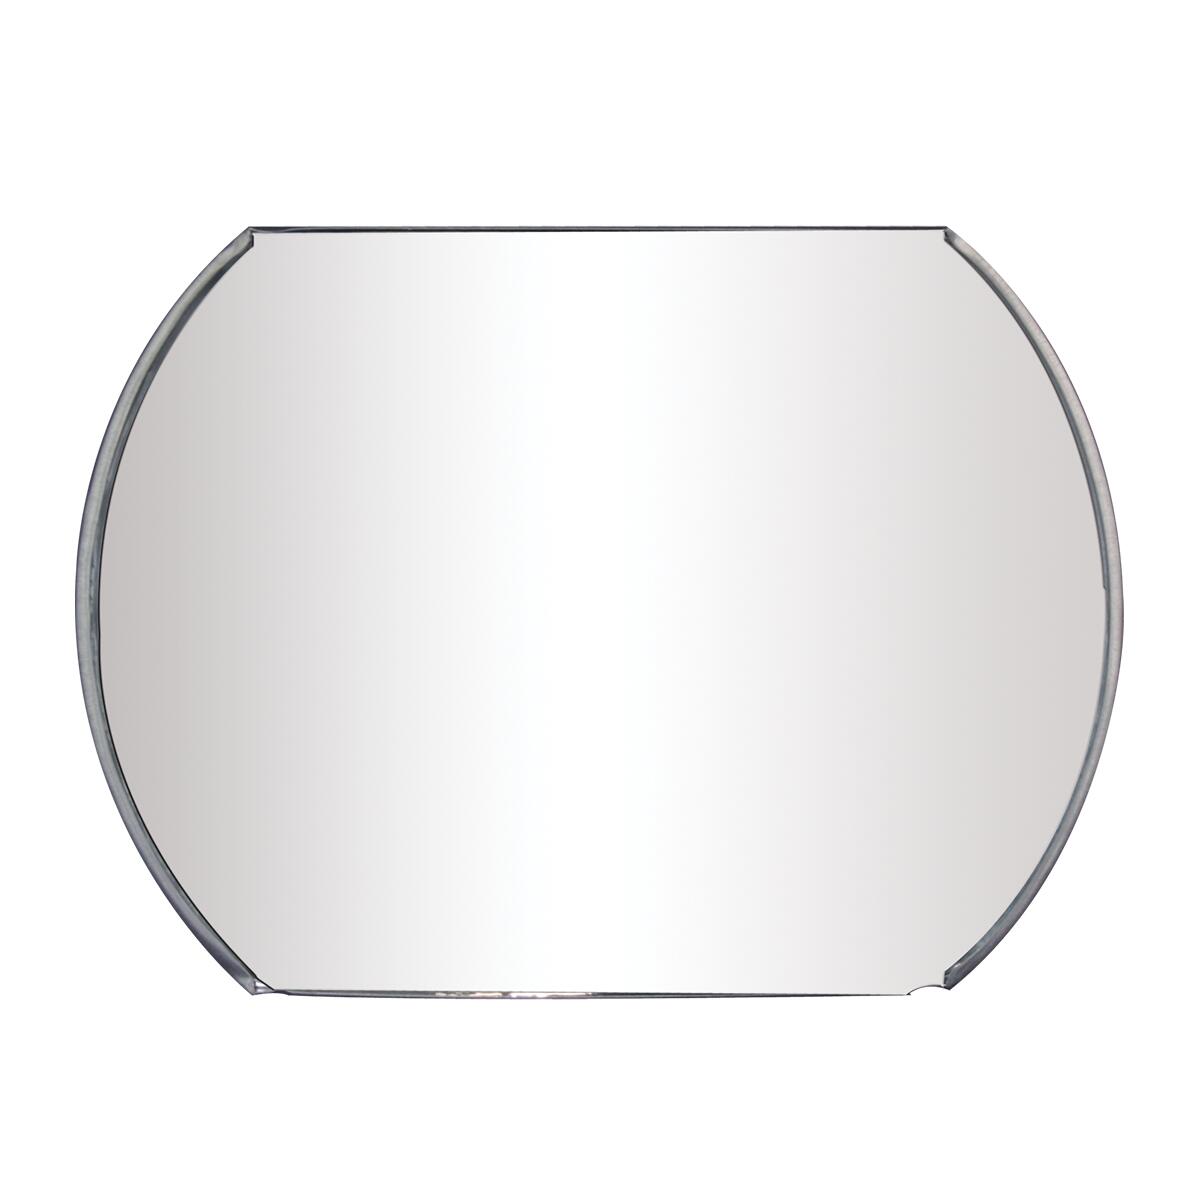 Utility Vehicles and more GG Grand General 3 3 Grand General 33040 3” Round Stick-on Convex Spot Mirror for Trucks Buses 